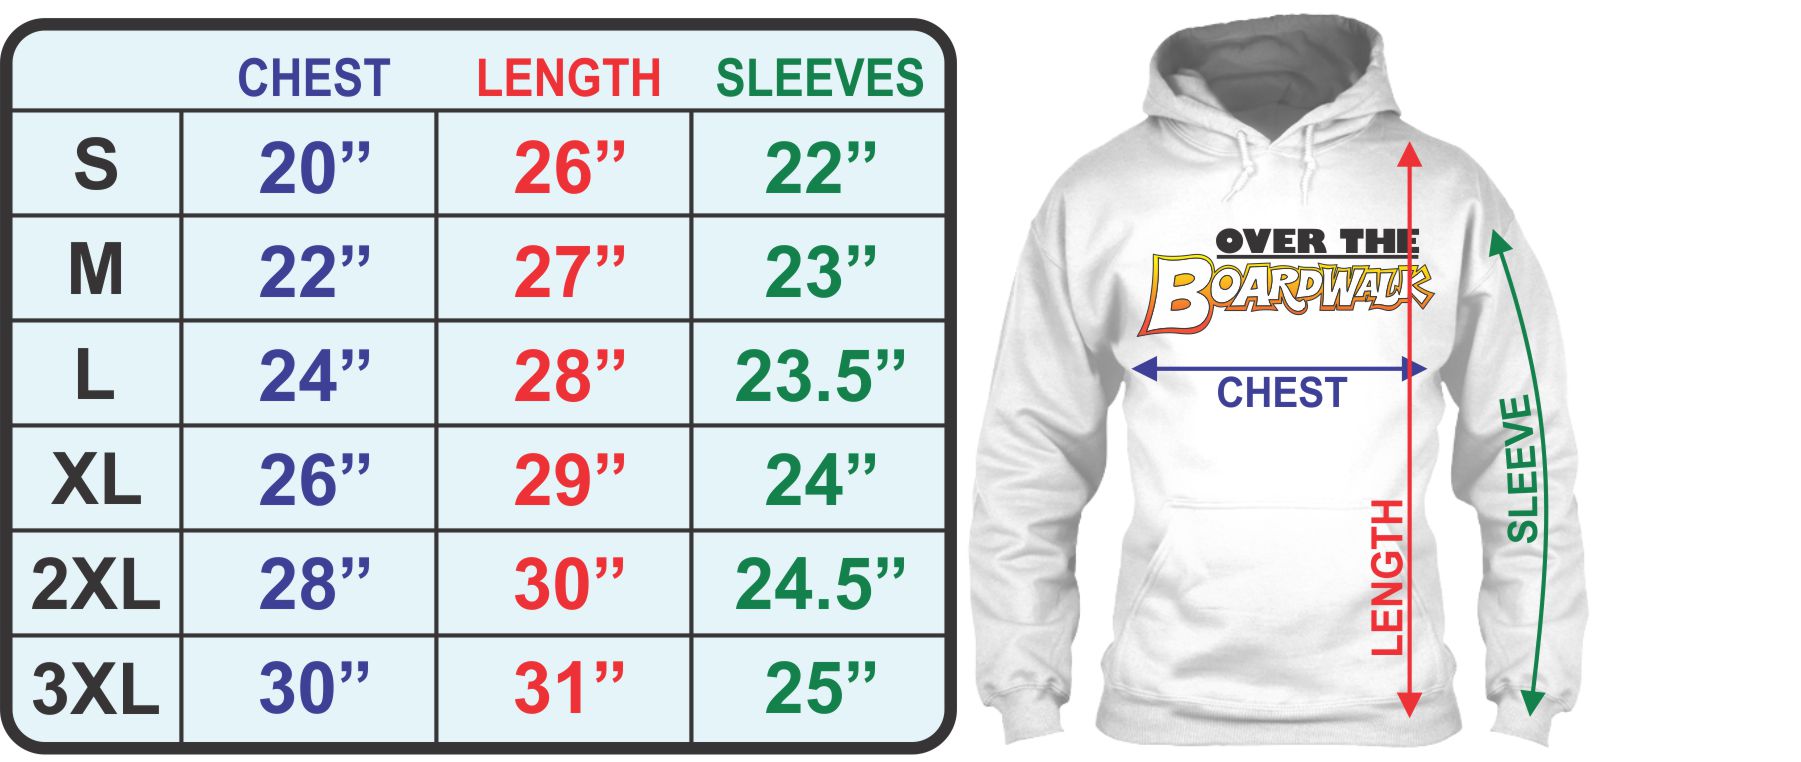 Adult Hoodie Size Chart - Over the Boardwalk Shirts